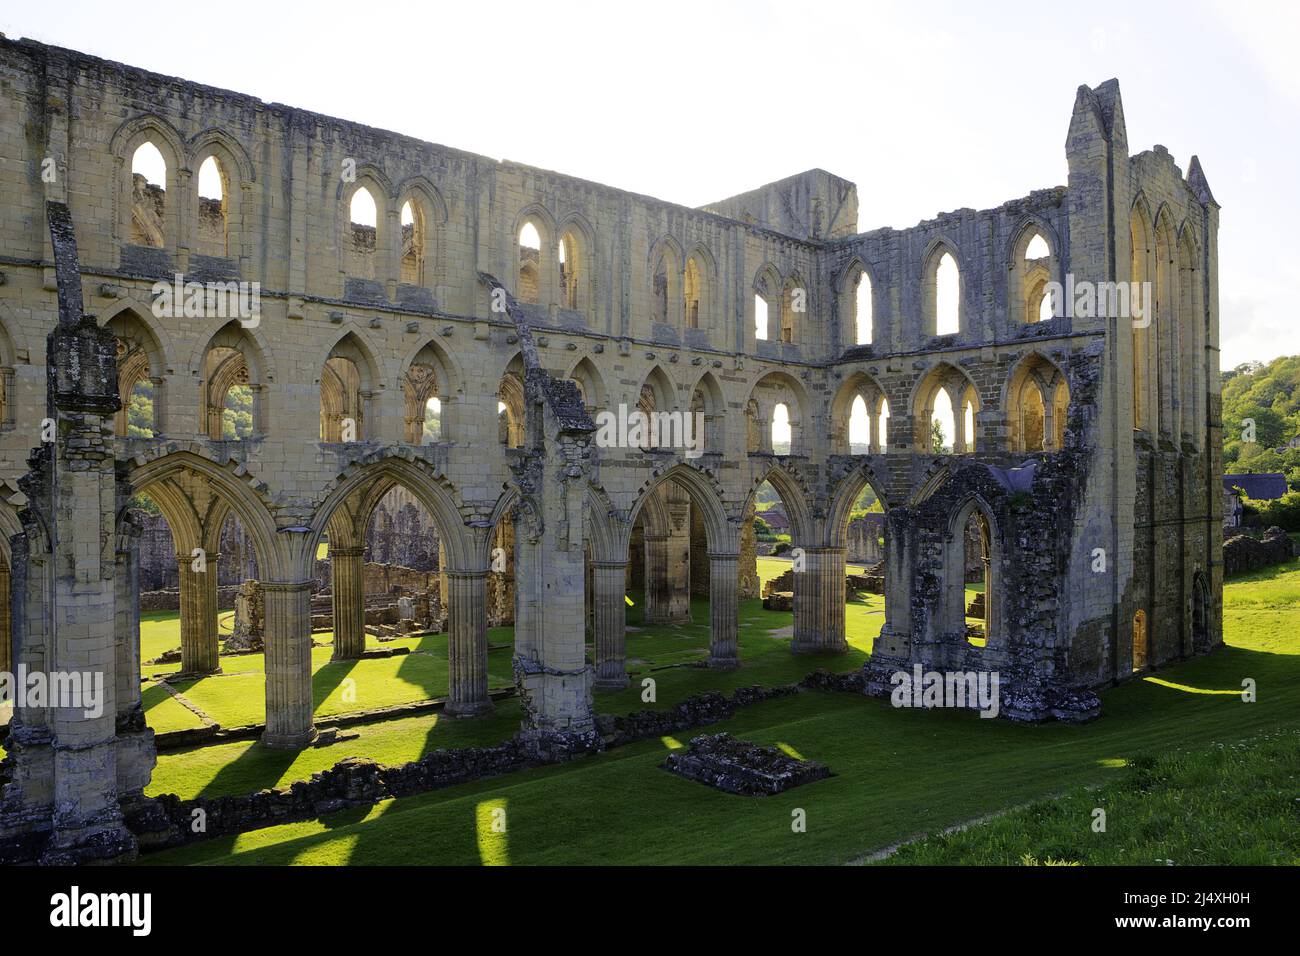 Presbytery & North Transept of ruined Rievaulx Cistercian Abbey founded 1132 - suppressed 1538. Stock Photo